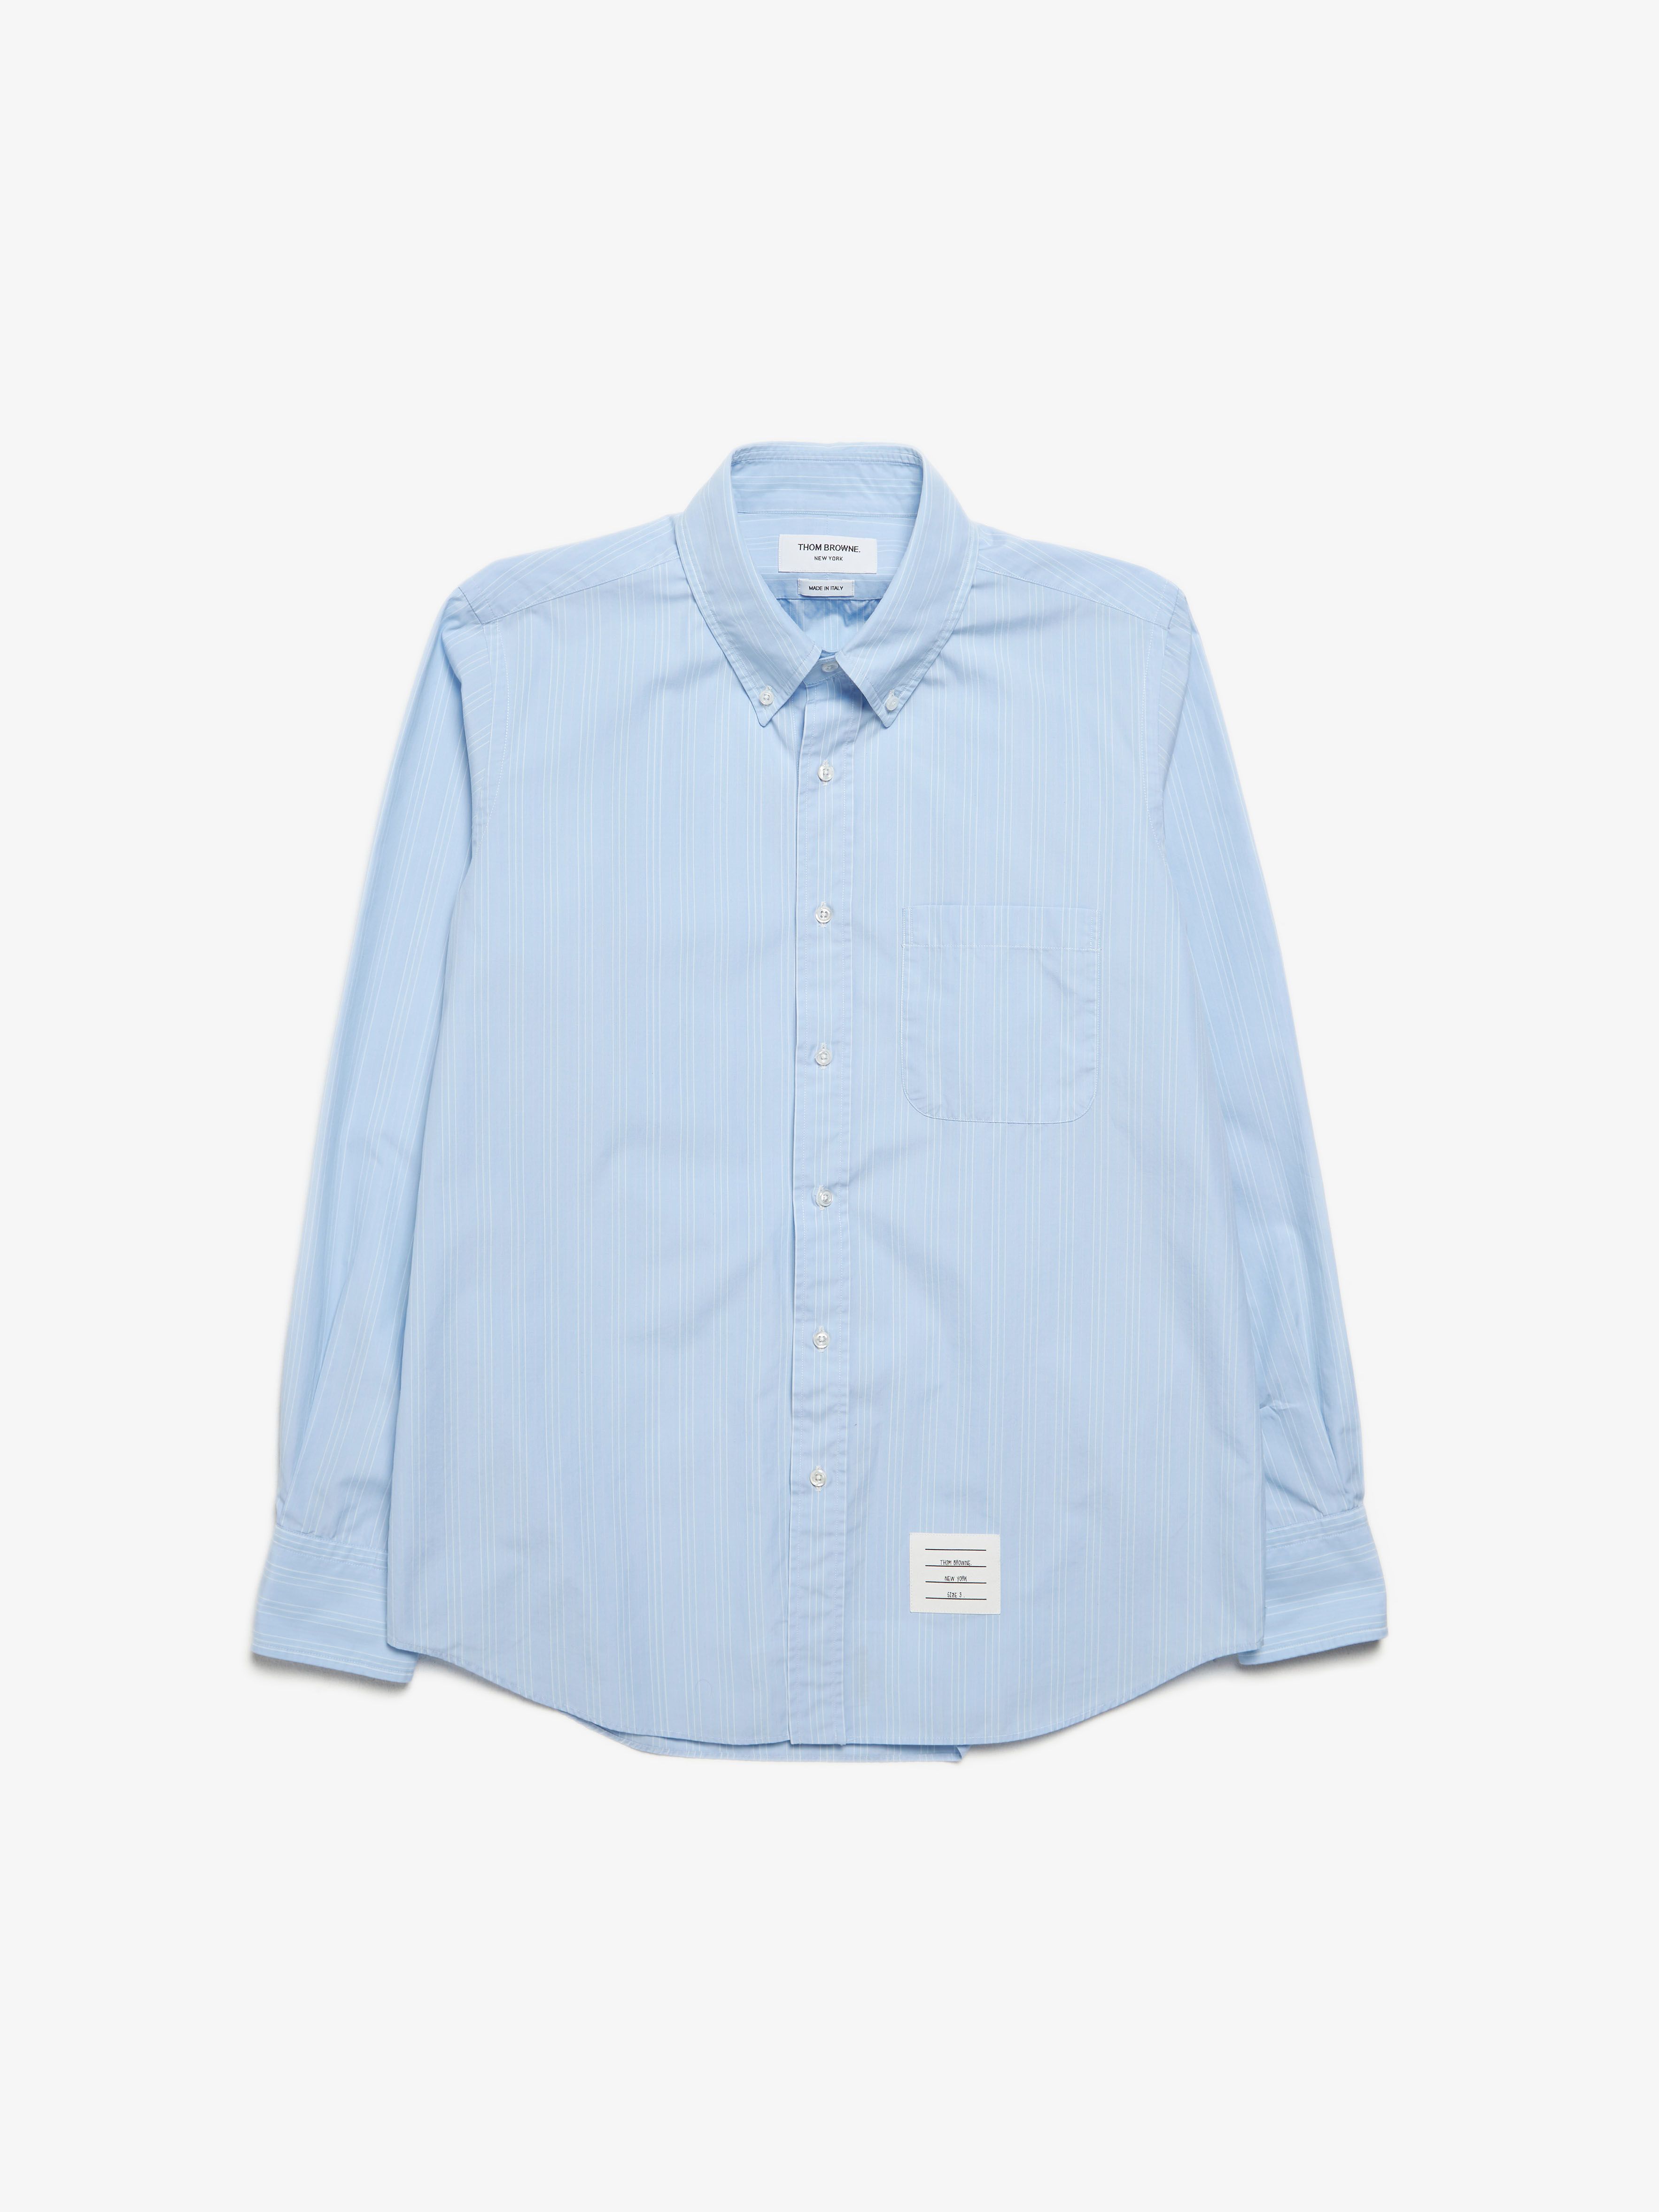 Pre-owned Thom Browne Light Blue Lines Print Button Sleeve Shirt